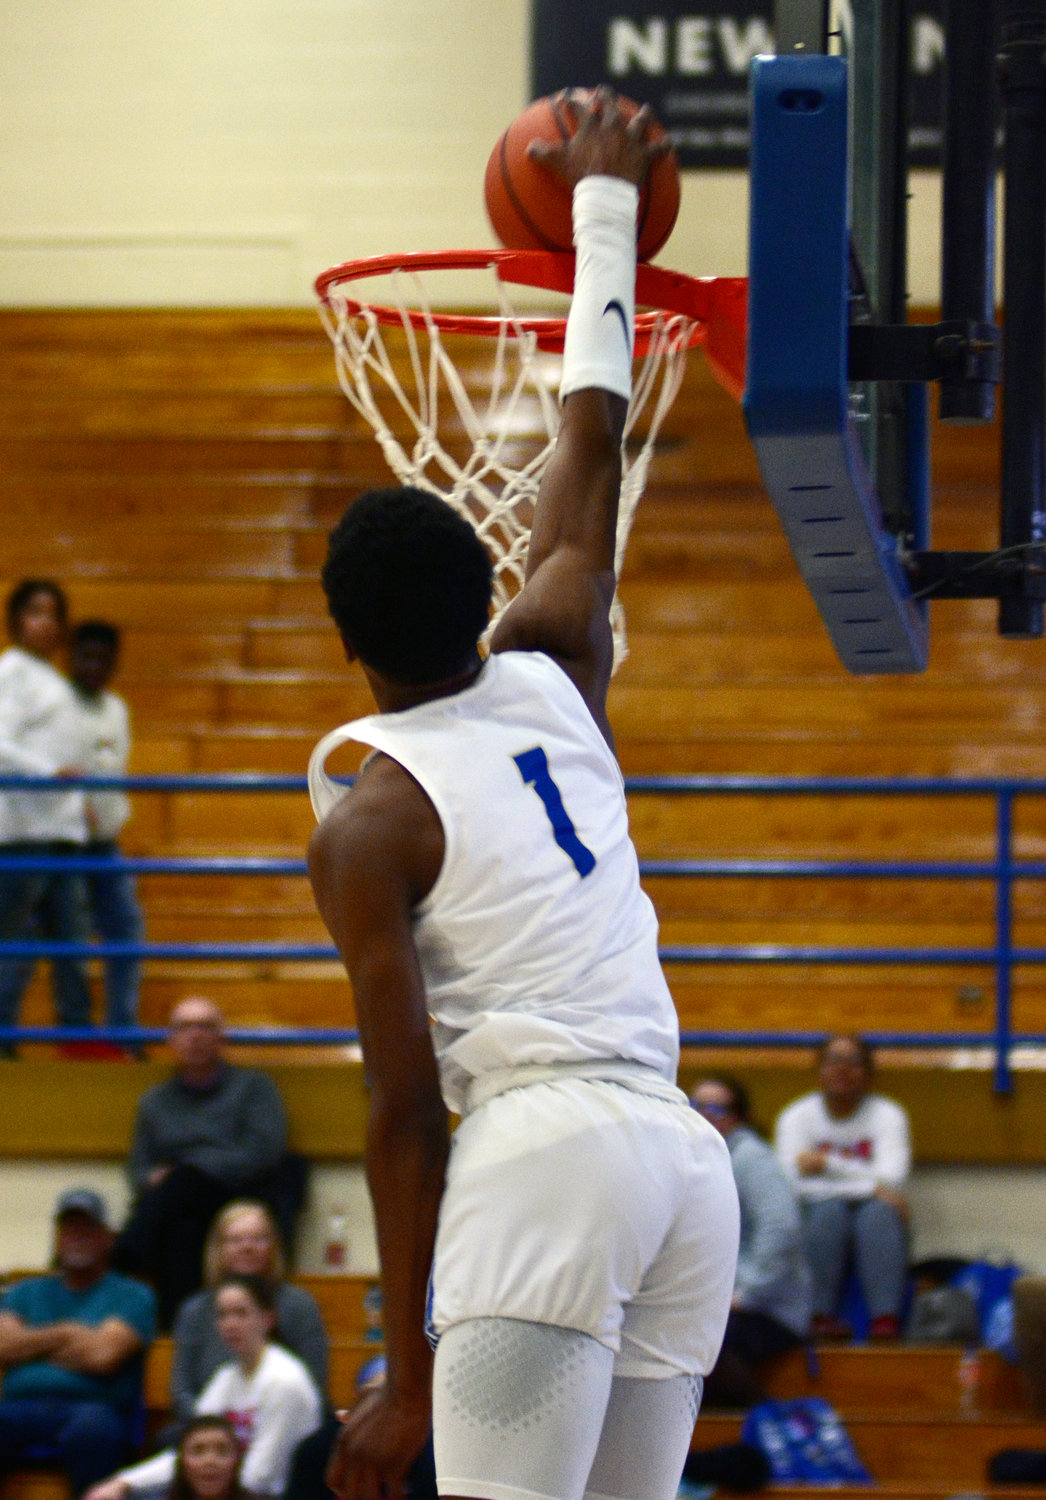 Shelbyville Central senior Jayshon Jones leaps high with his arm above the rim to cap off an impressive slam dunk in the Eagles win over district for Warren County on Tuesday night.